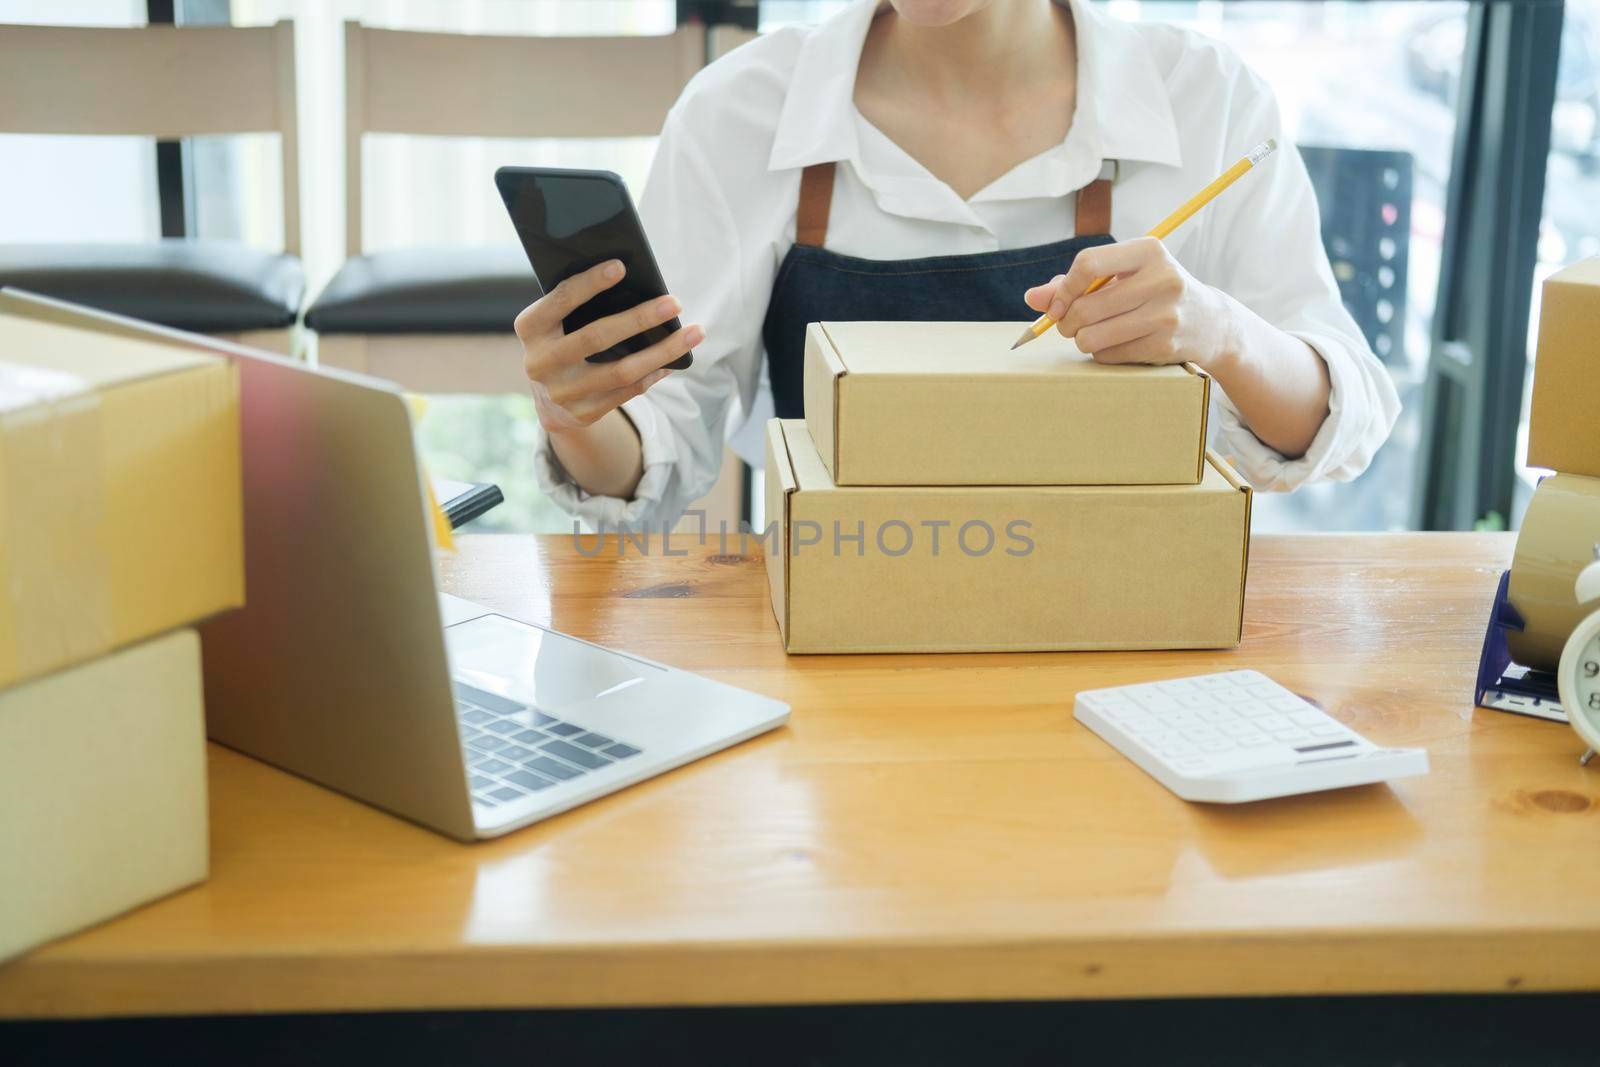 Asian female small online business or store owner packing shipping box and checking website retail order using cellphone preparing for delivery. Online business and e-coommerce concept.